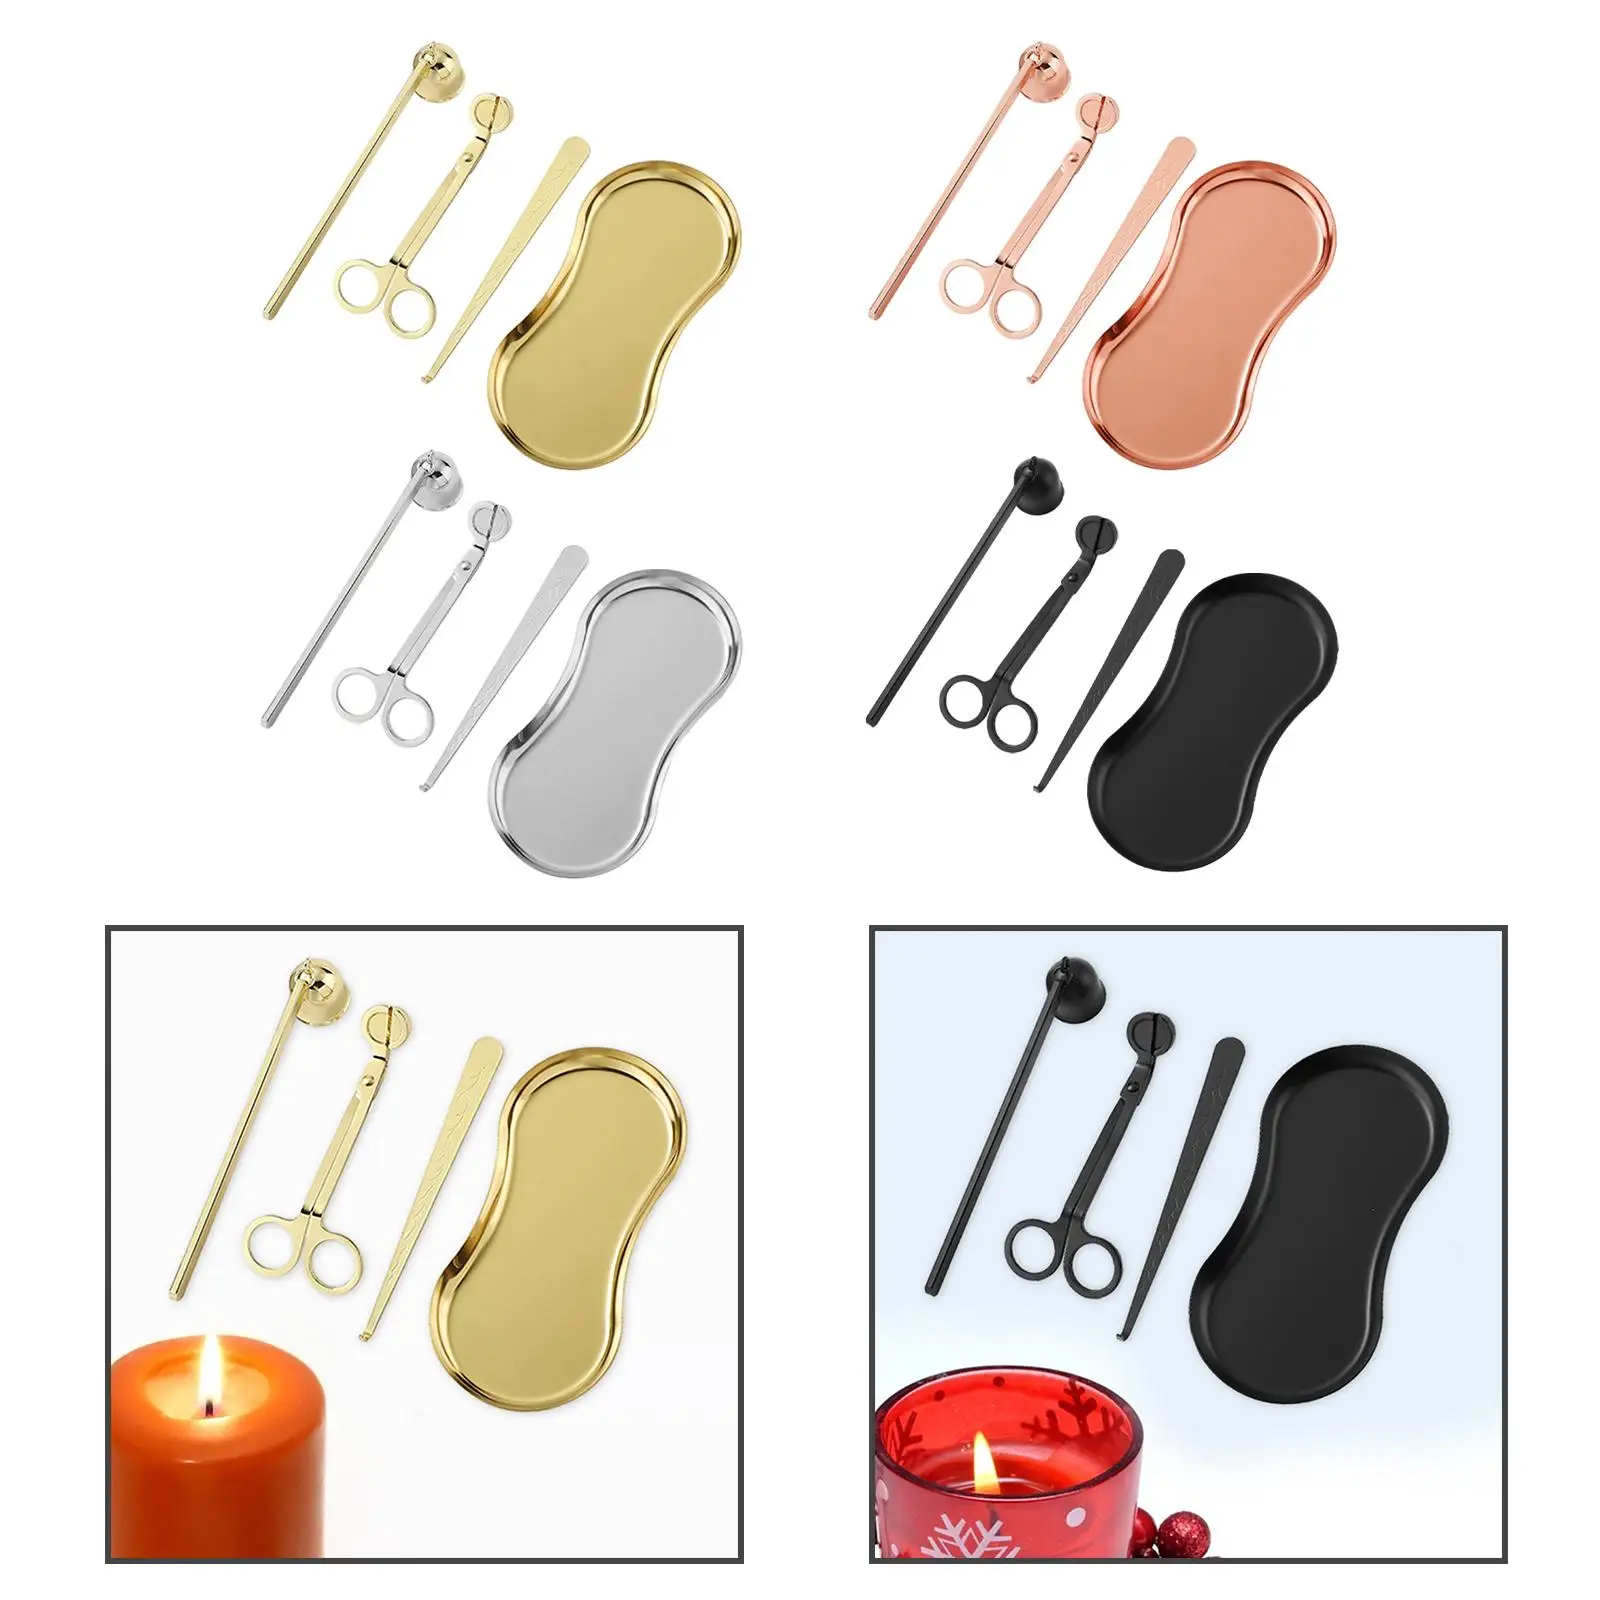 4 in 1 Candle Wick Trimmer Snuffer Set Professional Scratch Resistant Rust Proof